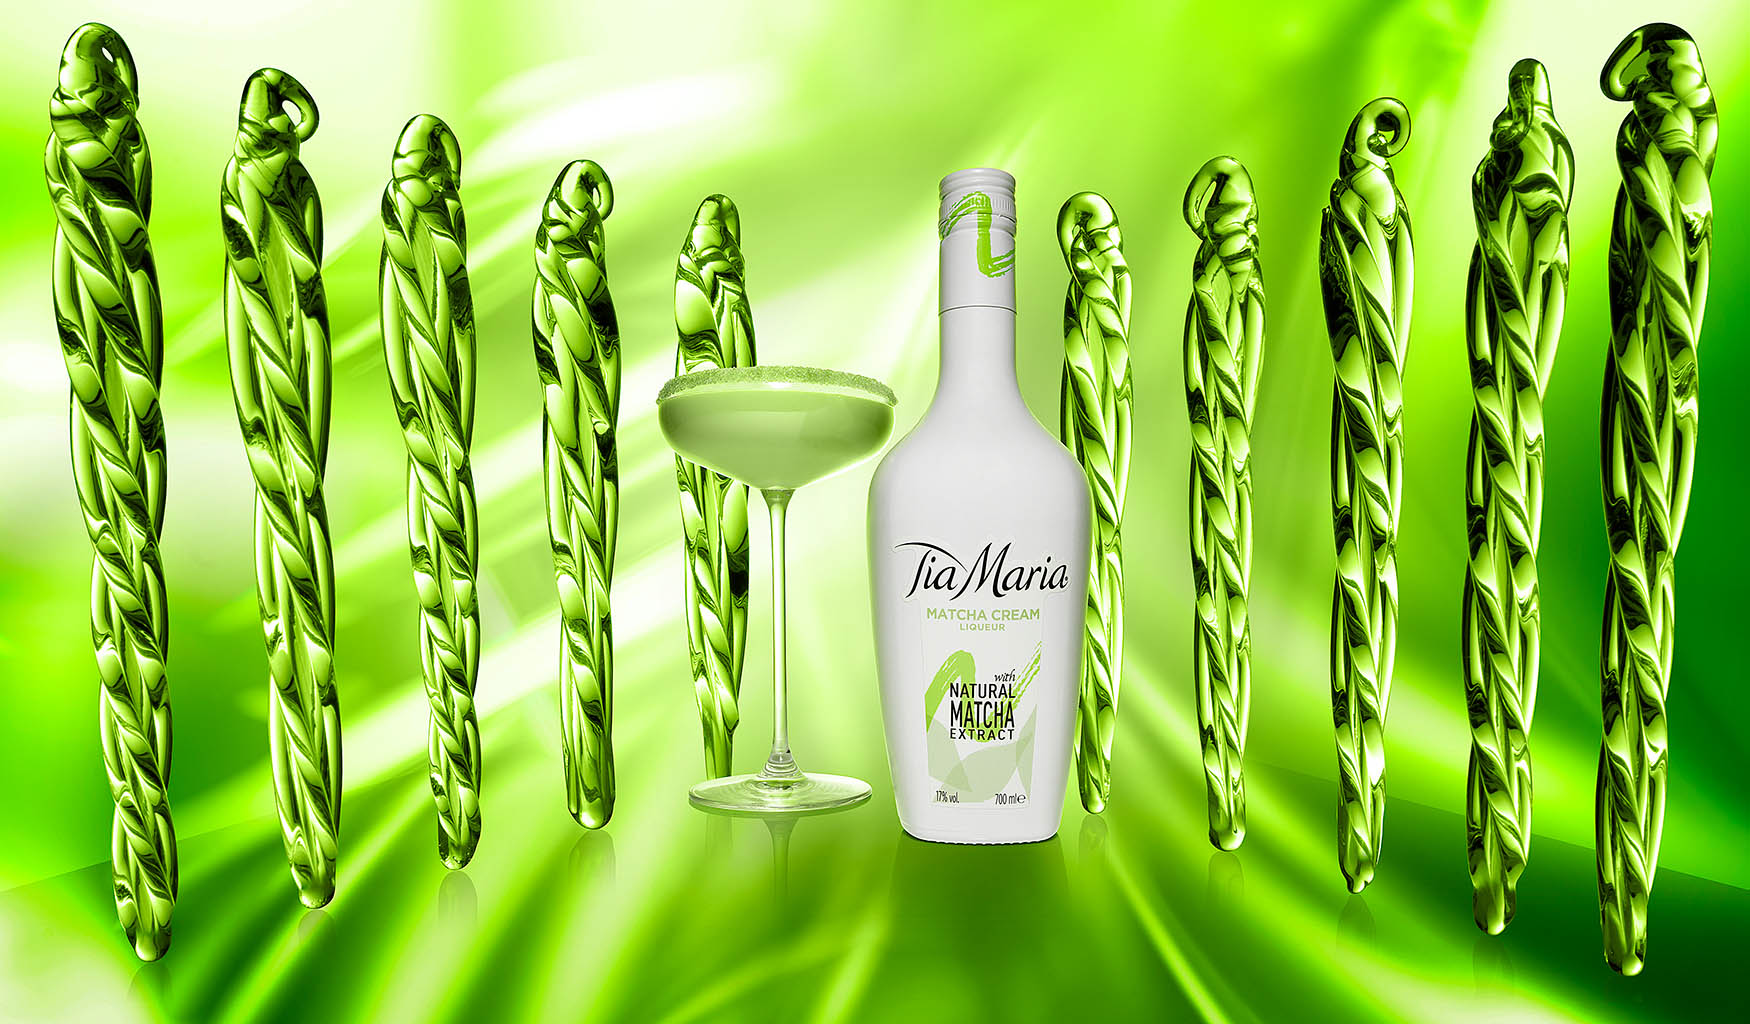 Packshot Factory - Serve - Tia Maria Matcha bottle and serve with icicles